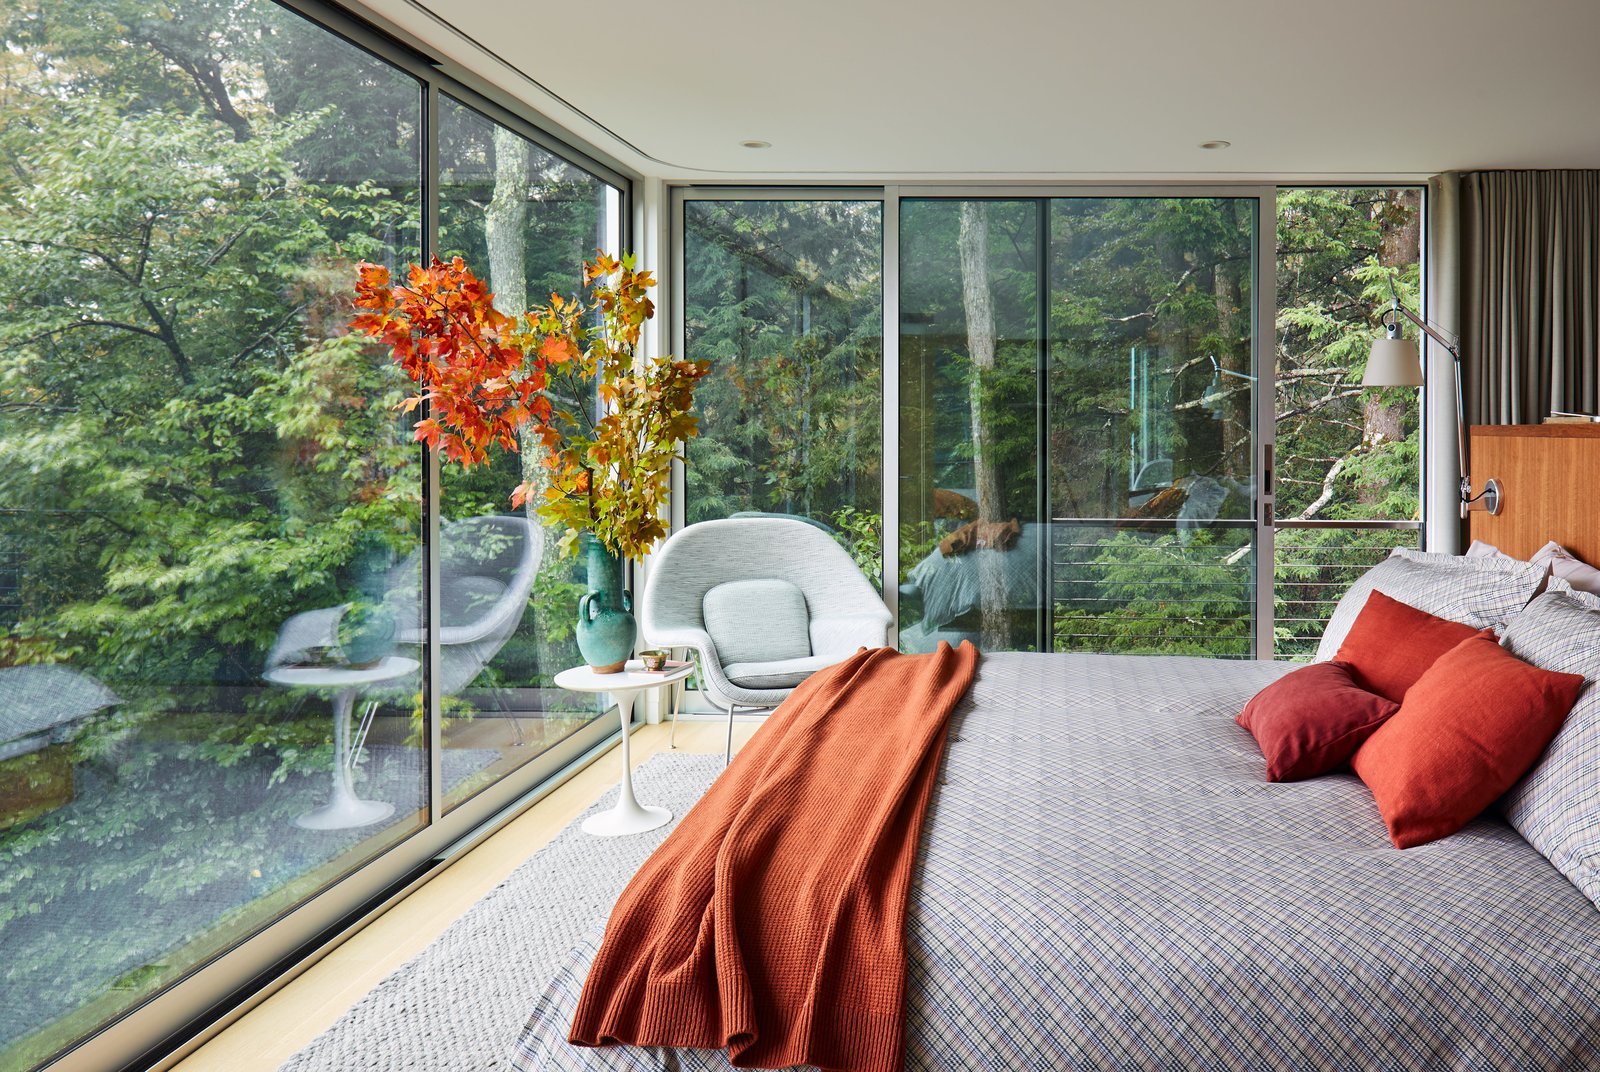   The master bedroom has 10-foot sliding glass doors which provide views 15 feet above the trees, as well as exceptional cross-ventilation.  